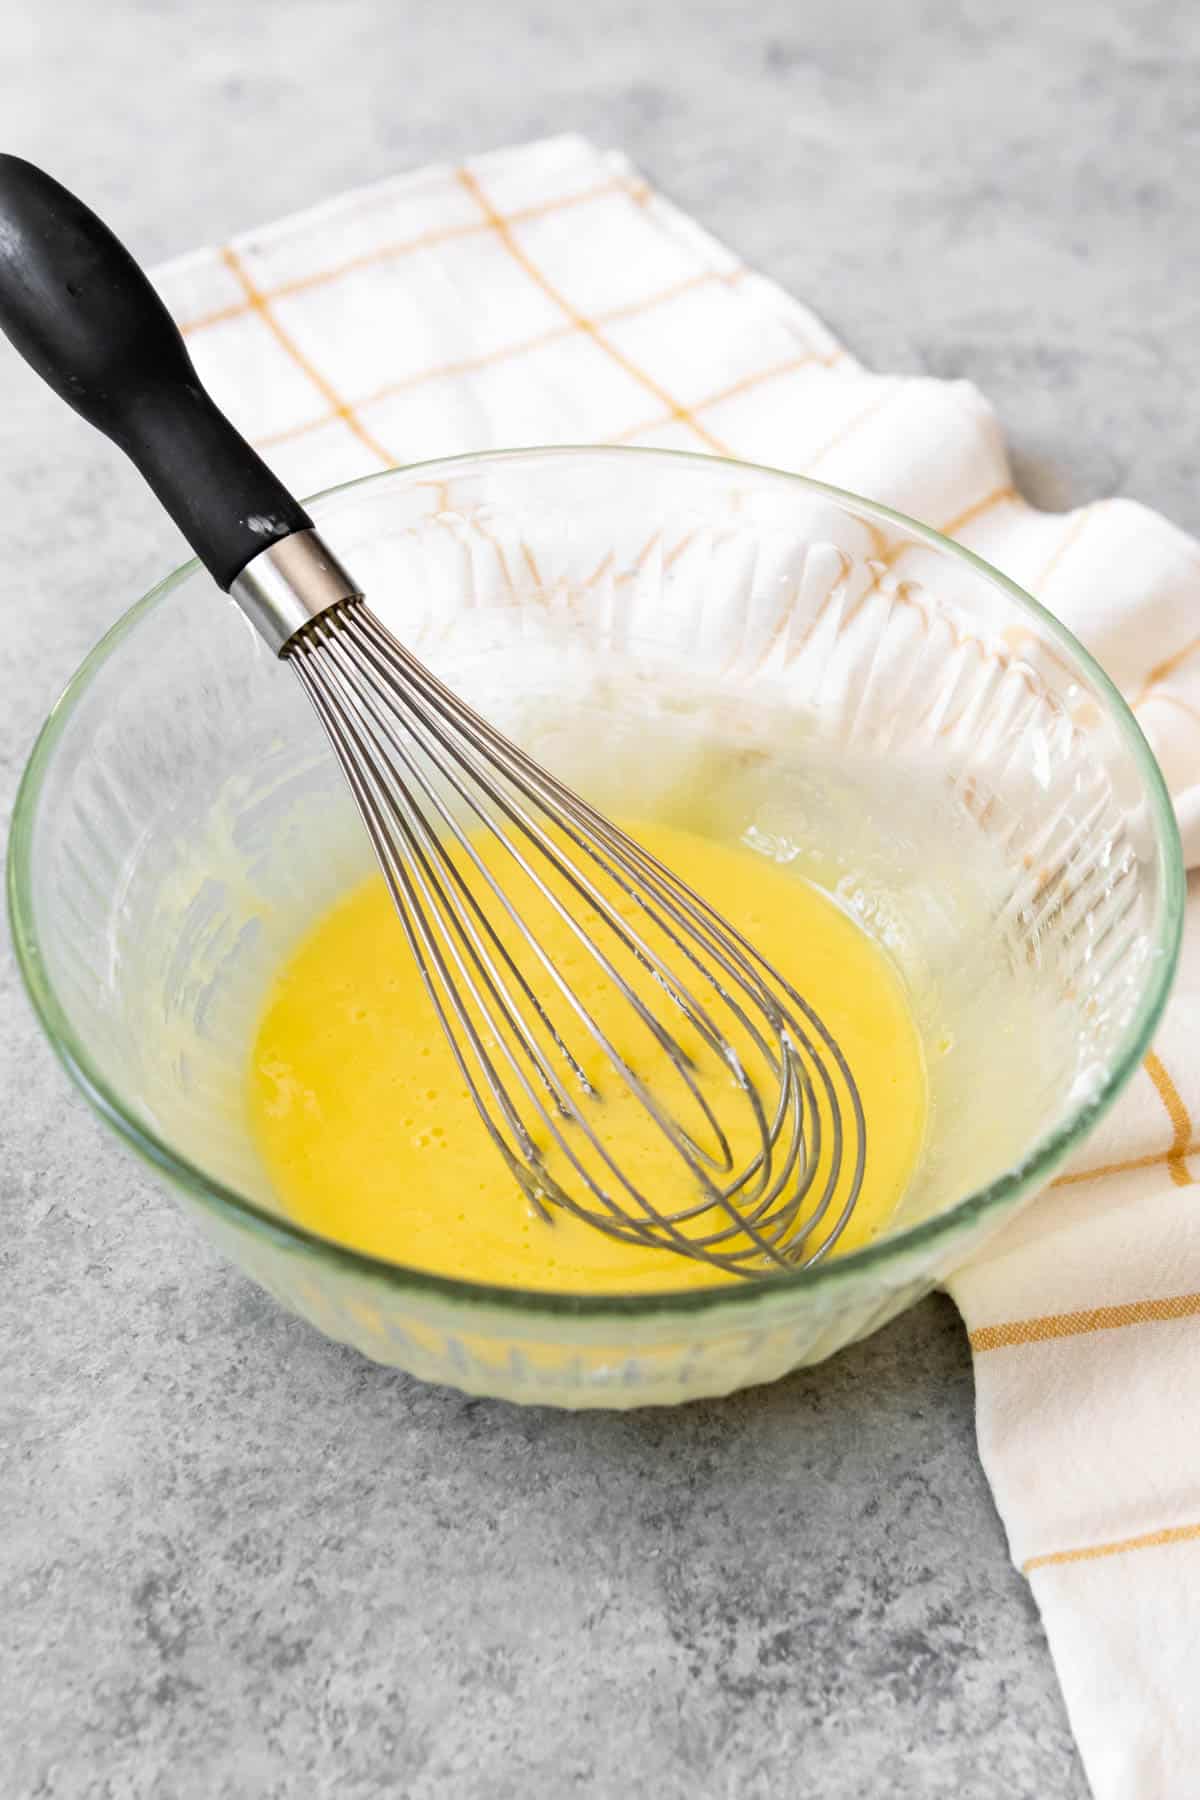 A whisk in a glass bowl filled with whisked egg yolks and sugar.